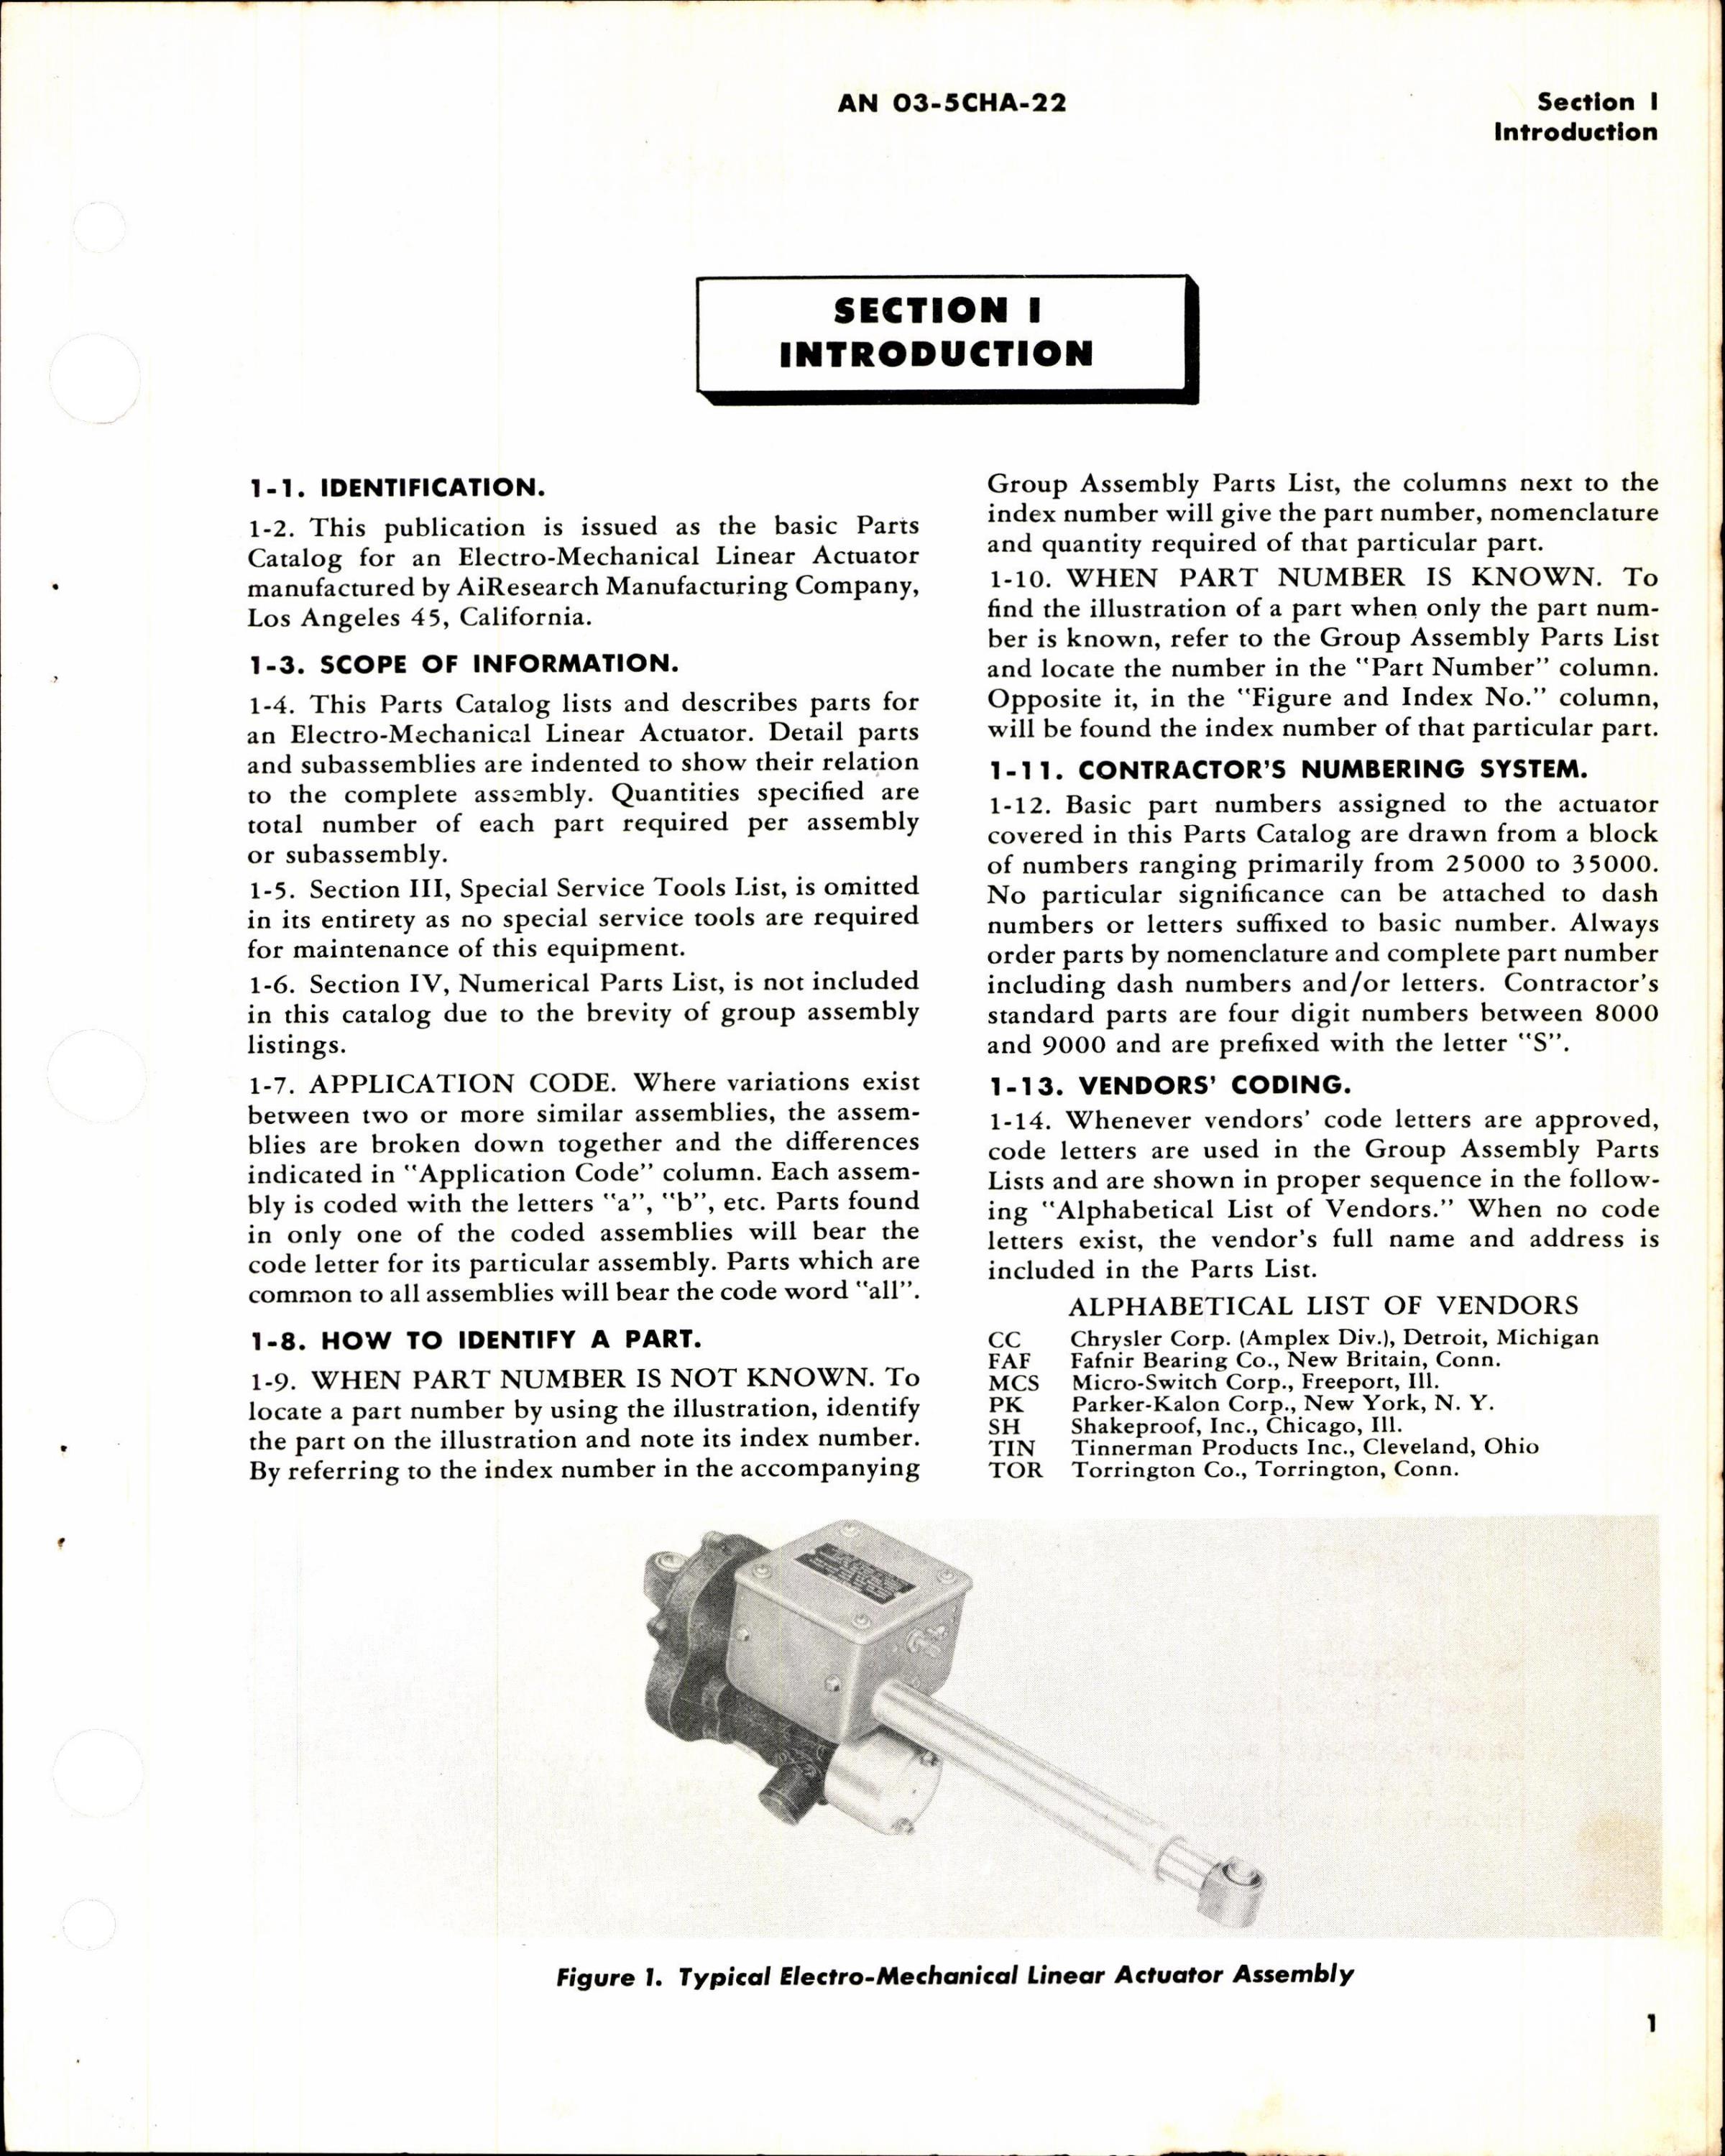 Sample page 3 from AirCorps Library document: Parts Catalog for Electro-Mechanical Linear Actuators